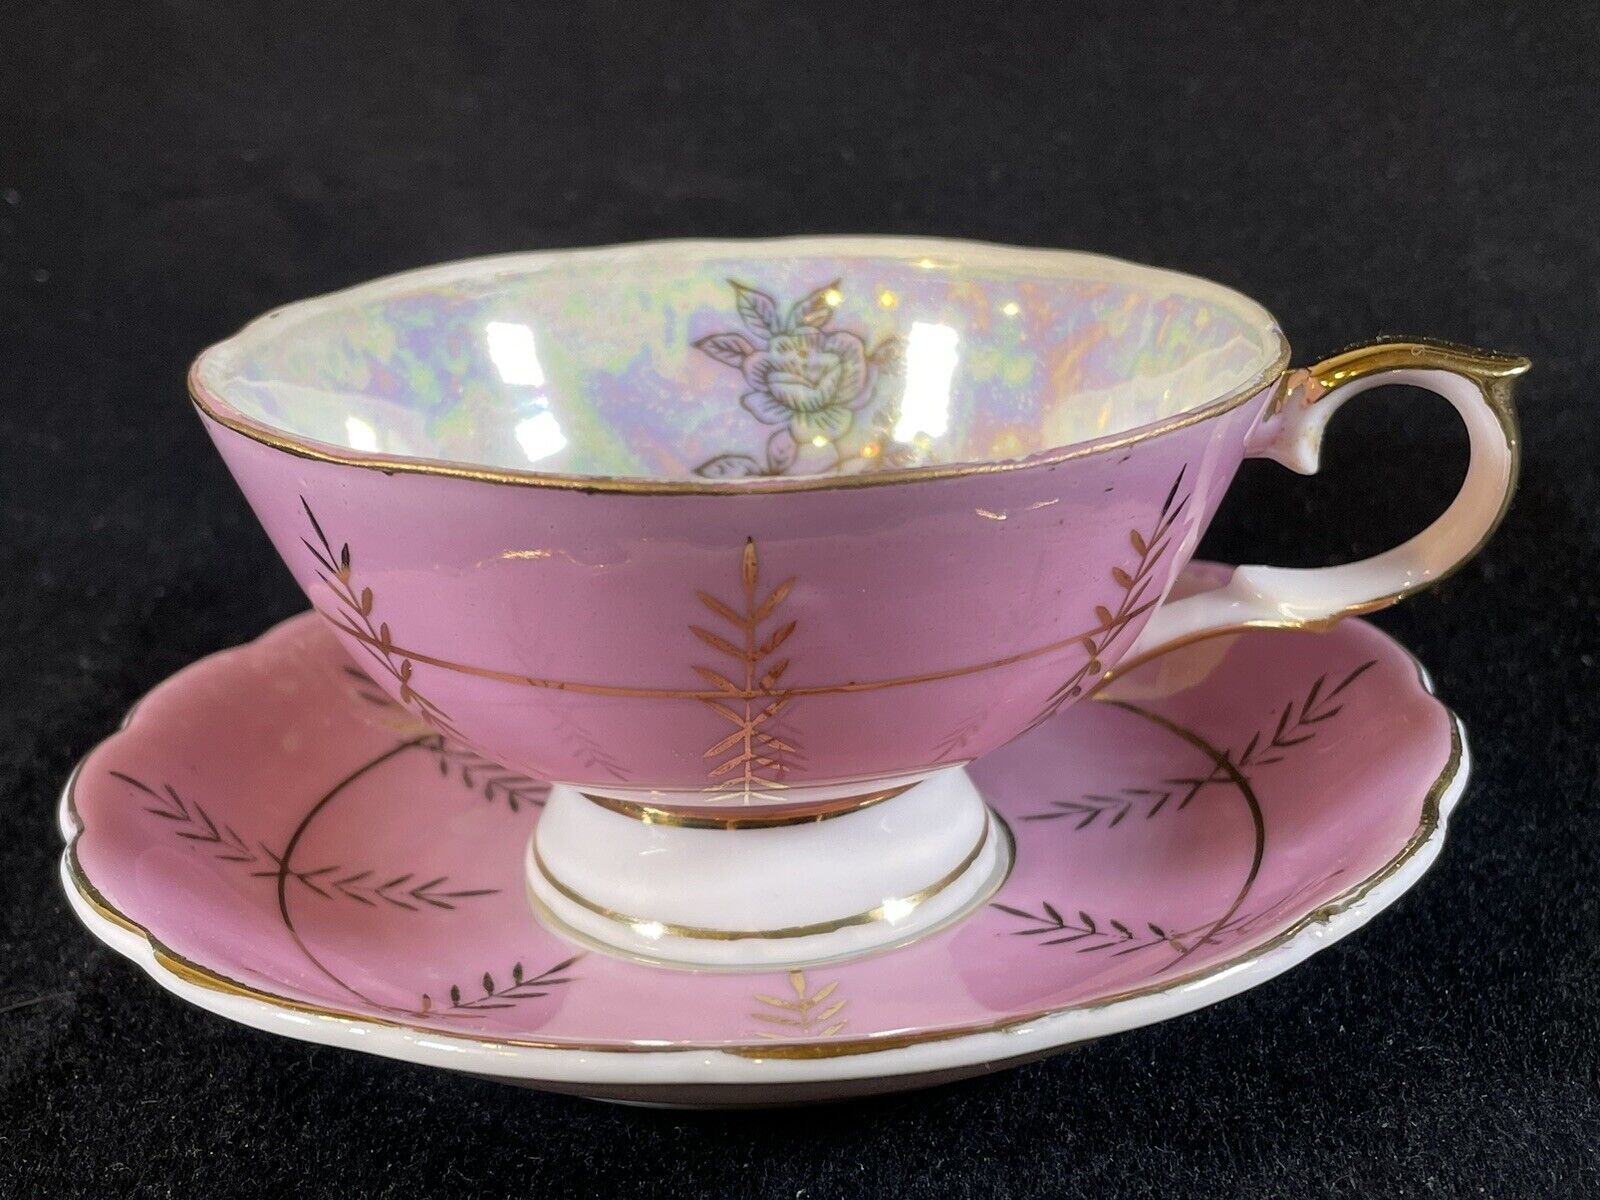 VTG Pink & Gold Lusterware Bone China Footed Tea Cup and Saucer Japan